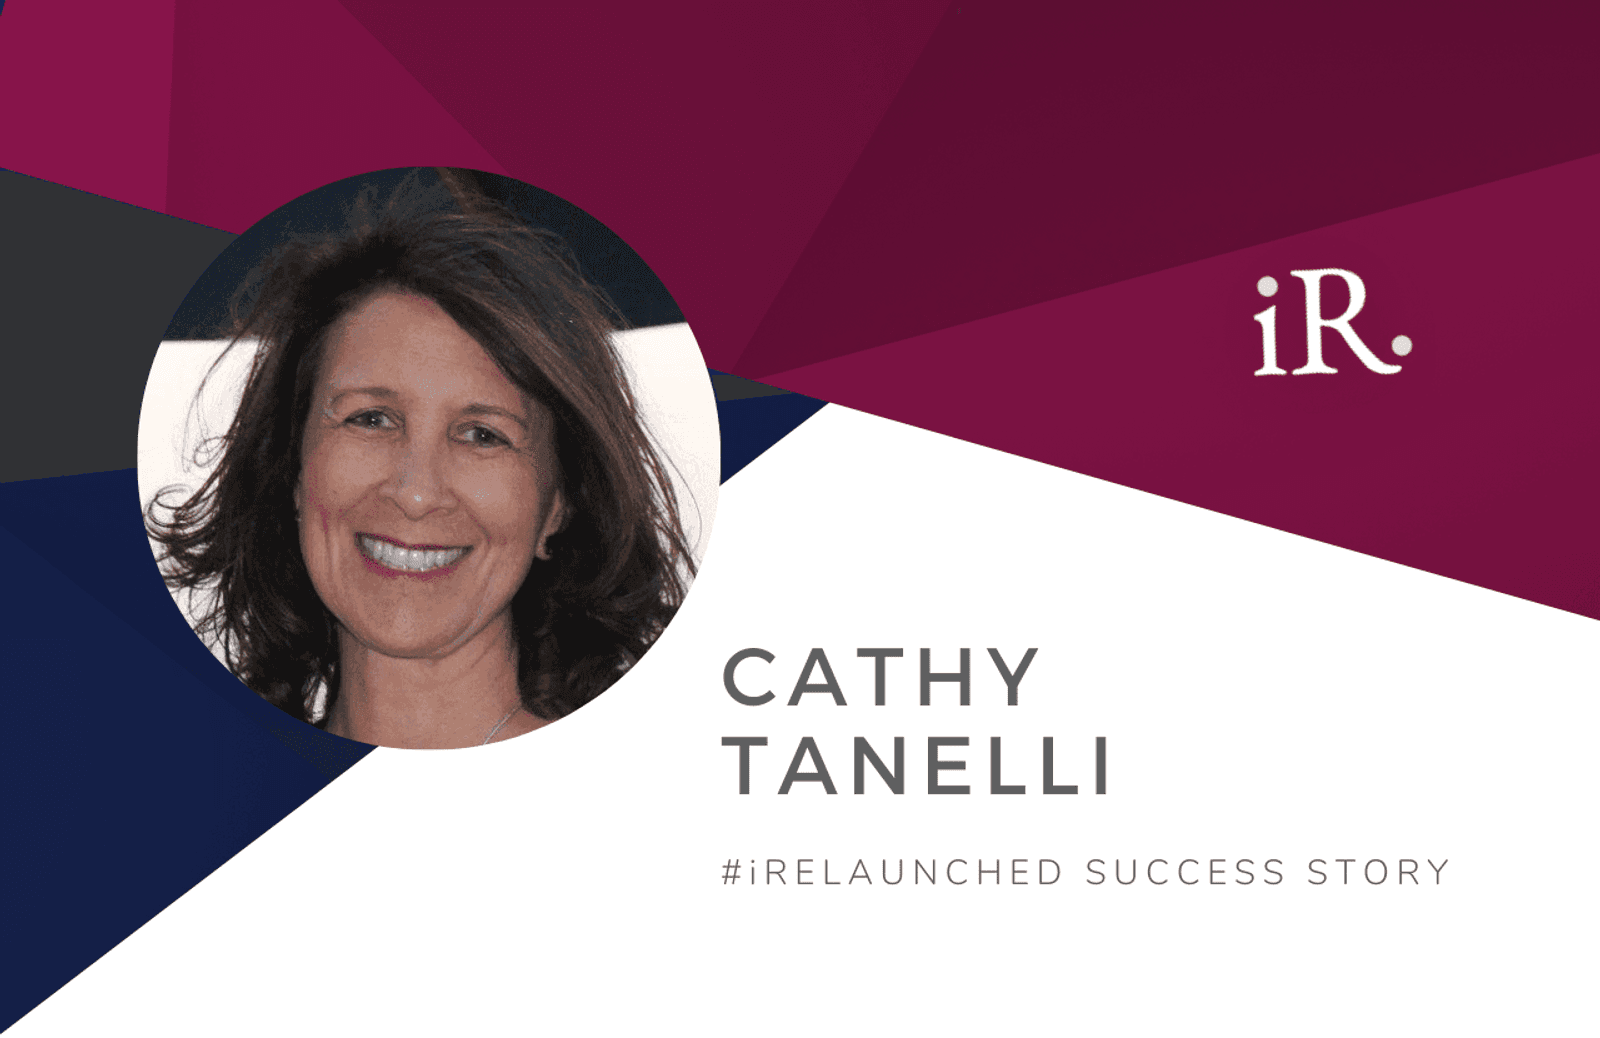 Cathy Tanelli's headshot and the text #iRelaunched Success Story along with the iRelaunch logo.  A navy and maroon geometric textured background intersect behind Cathy's headshot.